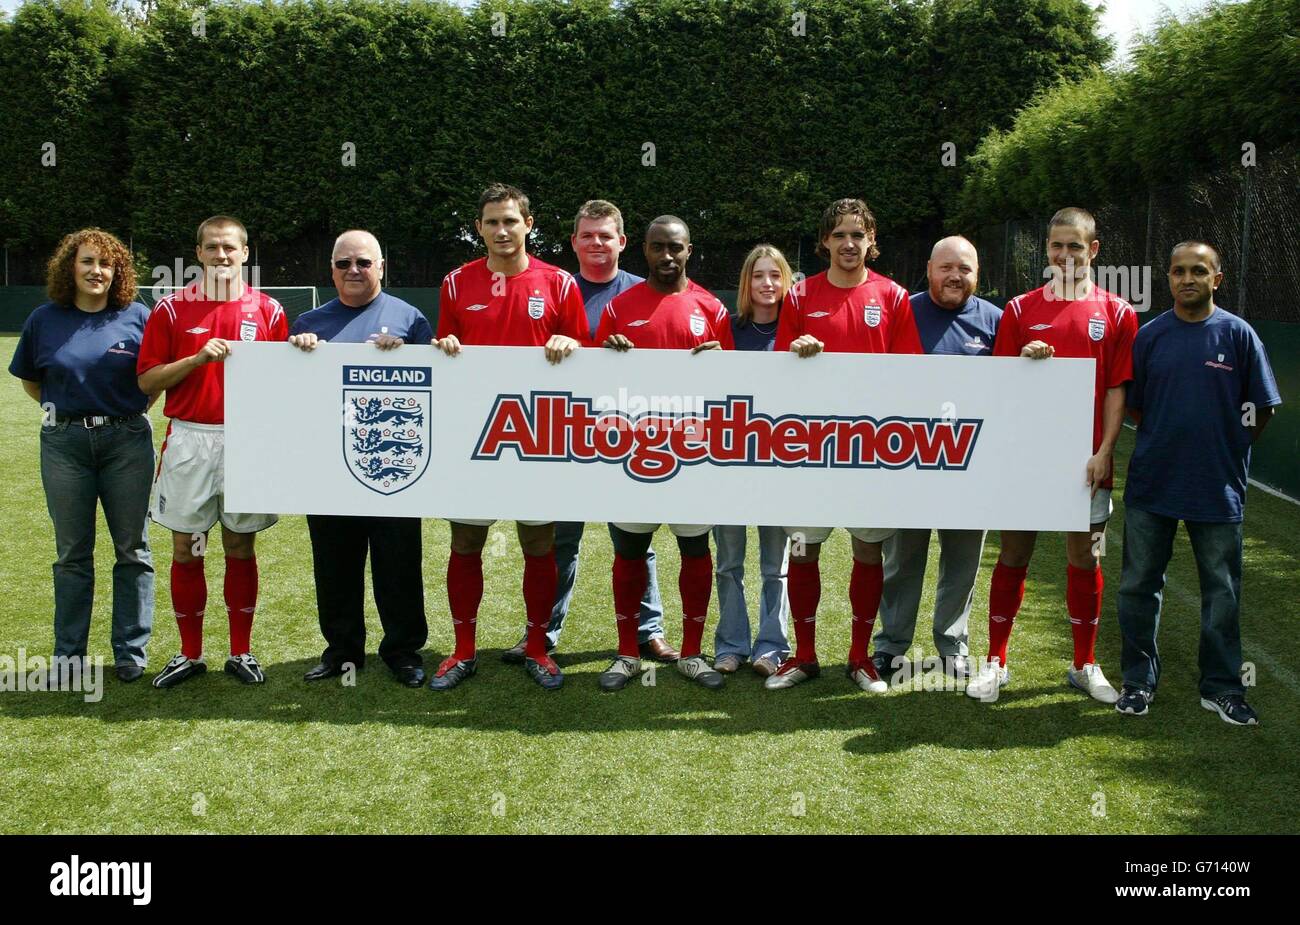 Six lucky England fans from the FA's official supporters group meet in Manchester with England players (in red, from left) Michael Owen, Frank Lampard, Darius Vassell, Owen Hargreaves and Joe Cole in Manchester, in supports of the FA's Alltogethernow campaign which promotes positive fan support at the Euro 2004 championships in Portugal. . Stock Photo